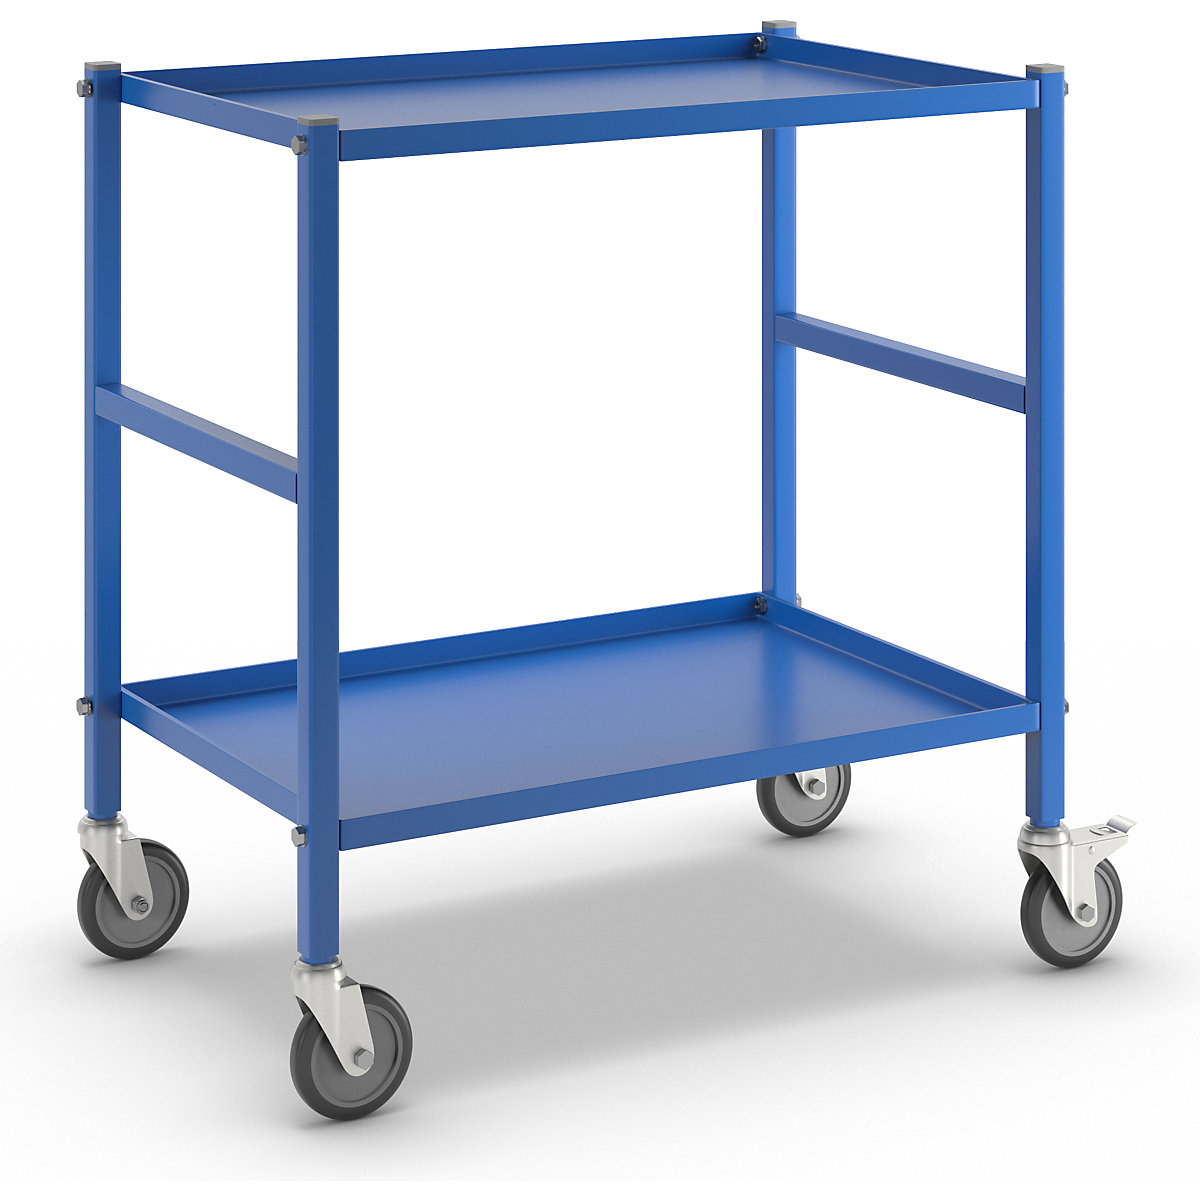 Table trolley with 2 shelves - Kongamek